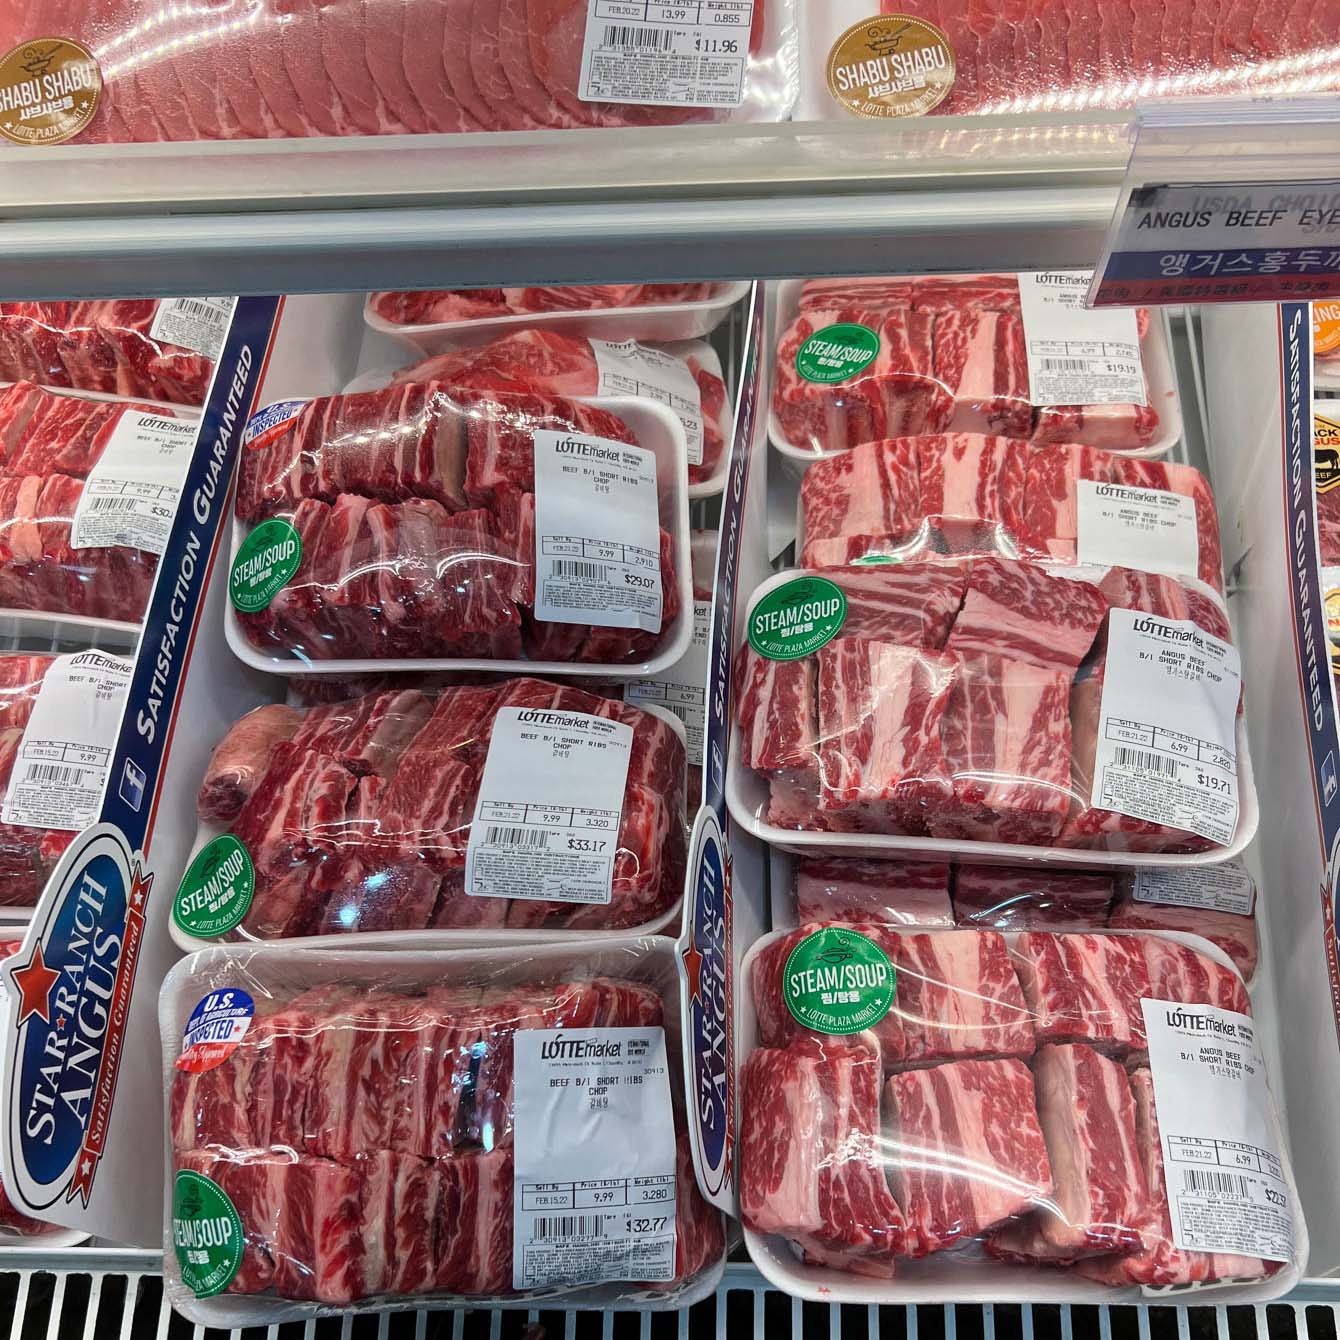 Beef short ribs are packed together and displayed on the shelf